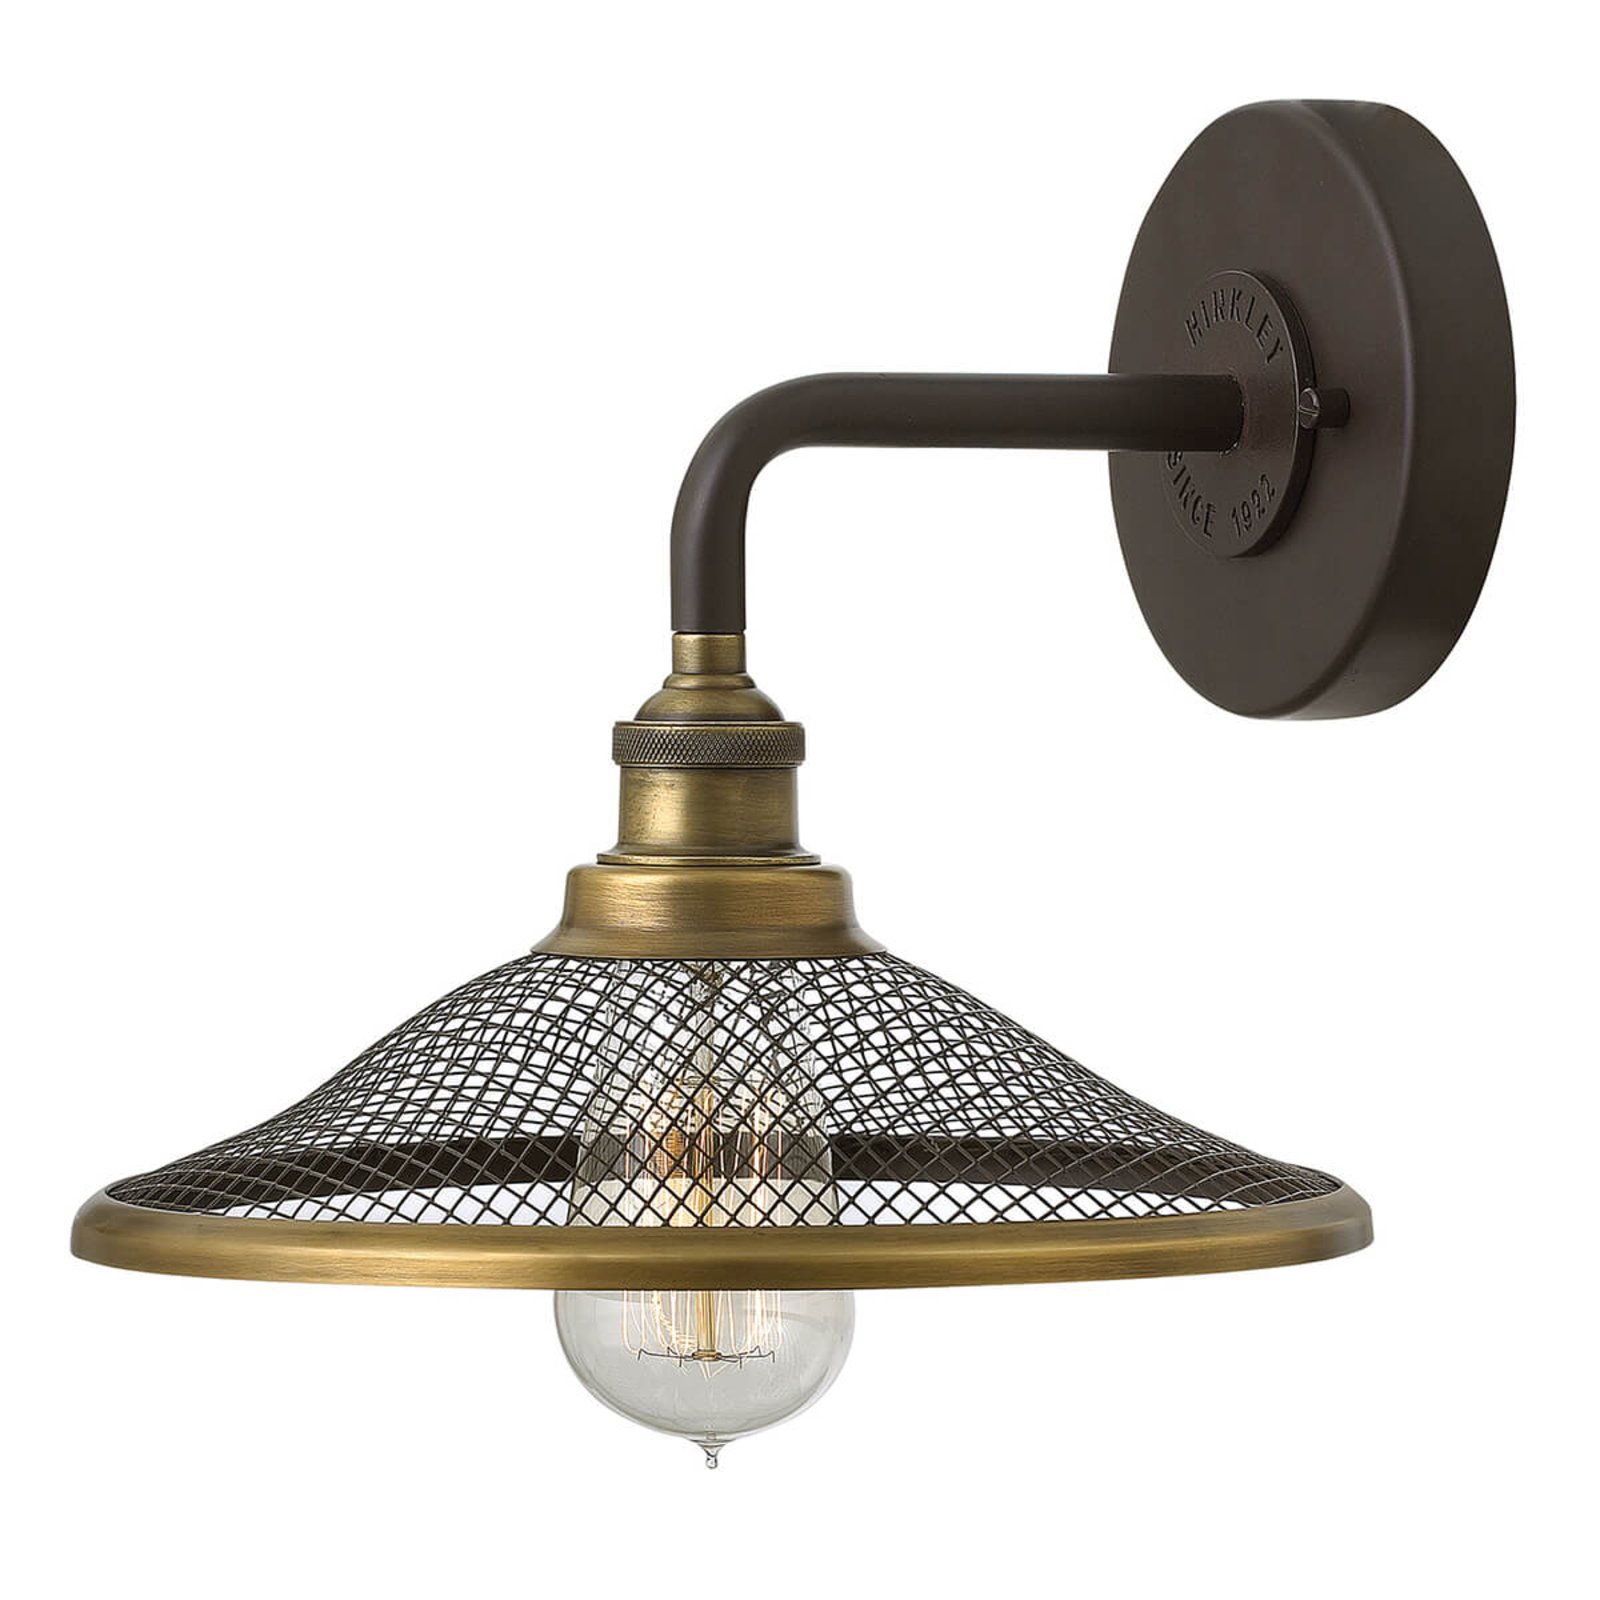 Industrial style wall light Rigby